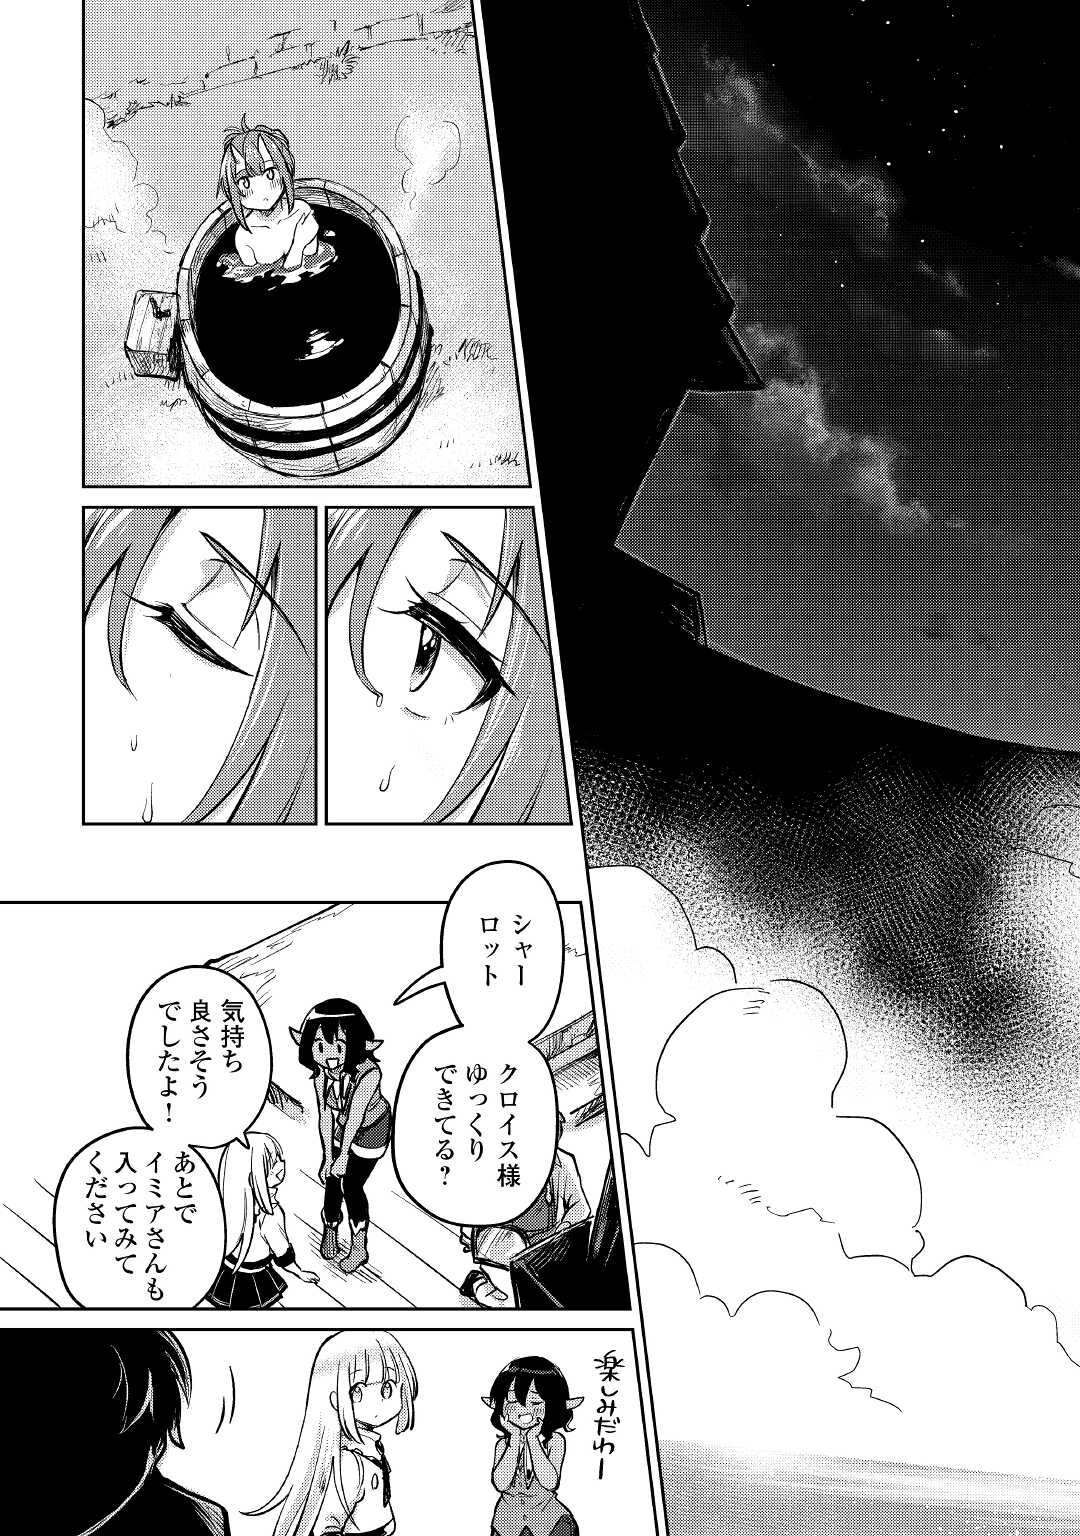 The Former Structural Researcher’s Story of Otherworldly Adventure 第35話 - Page 21